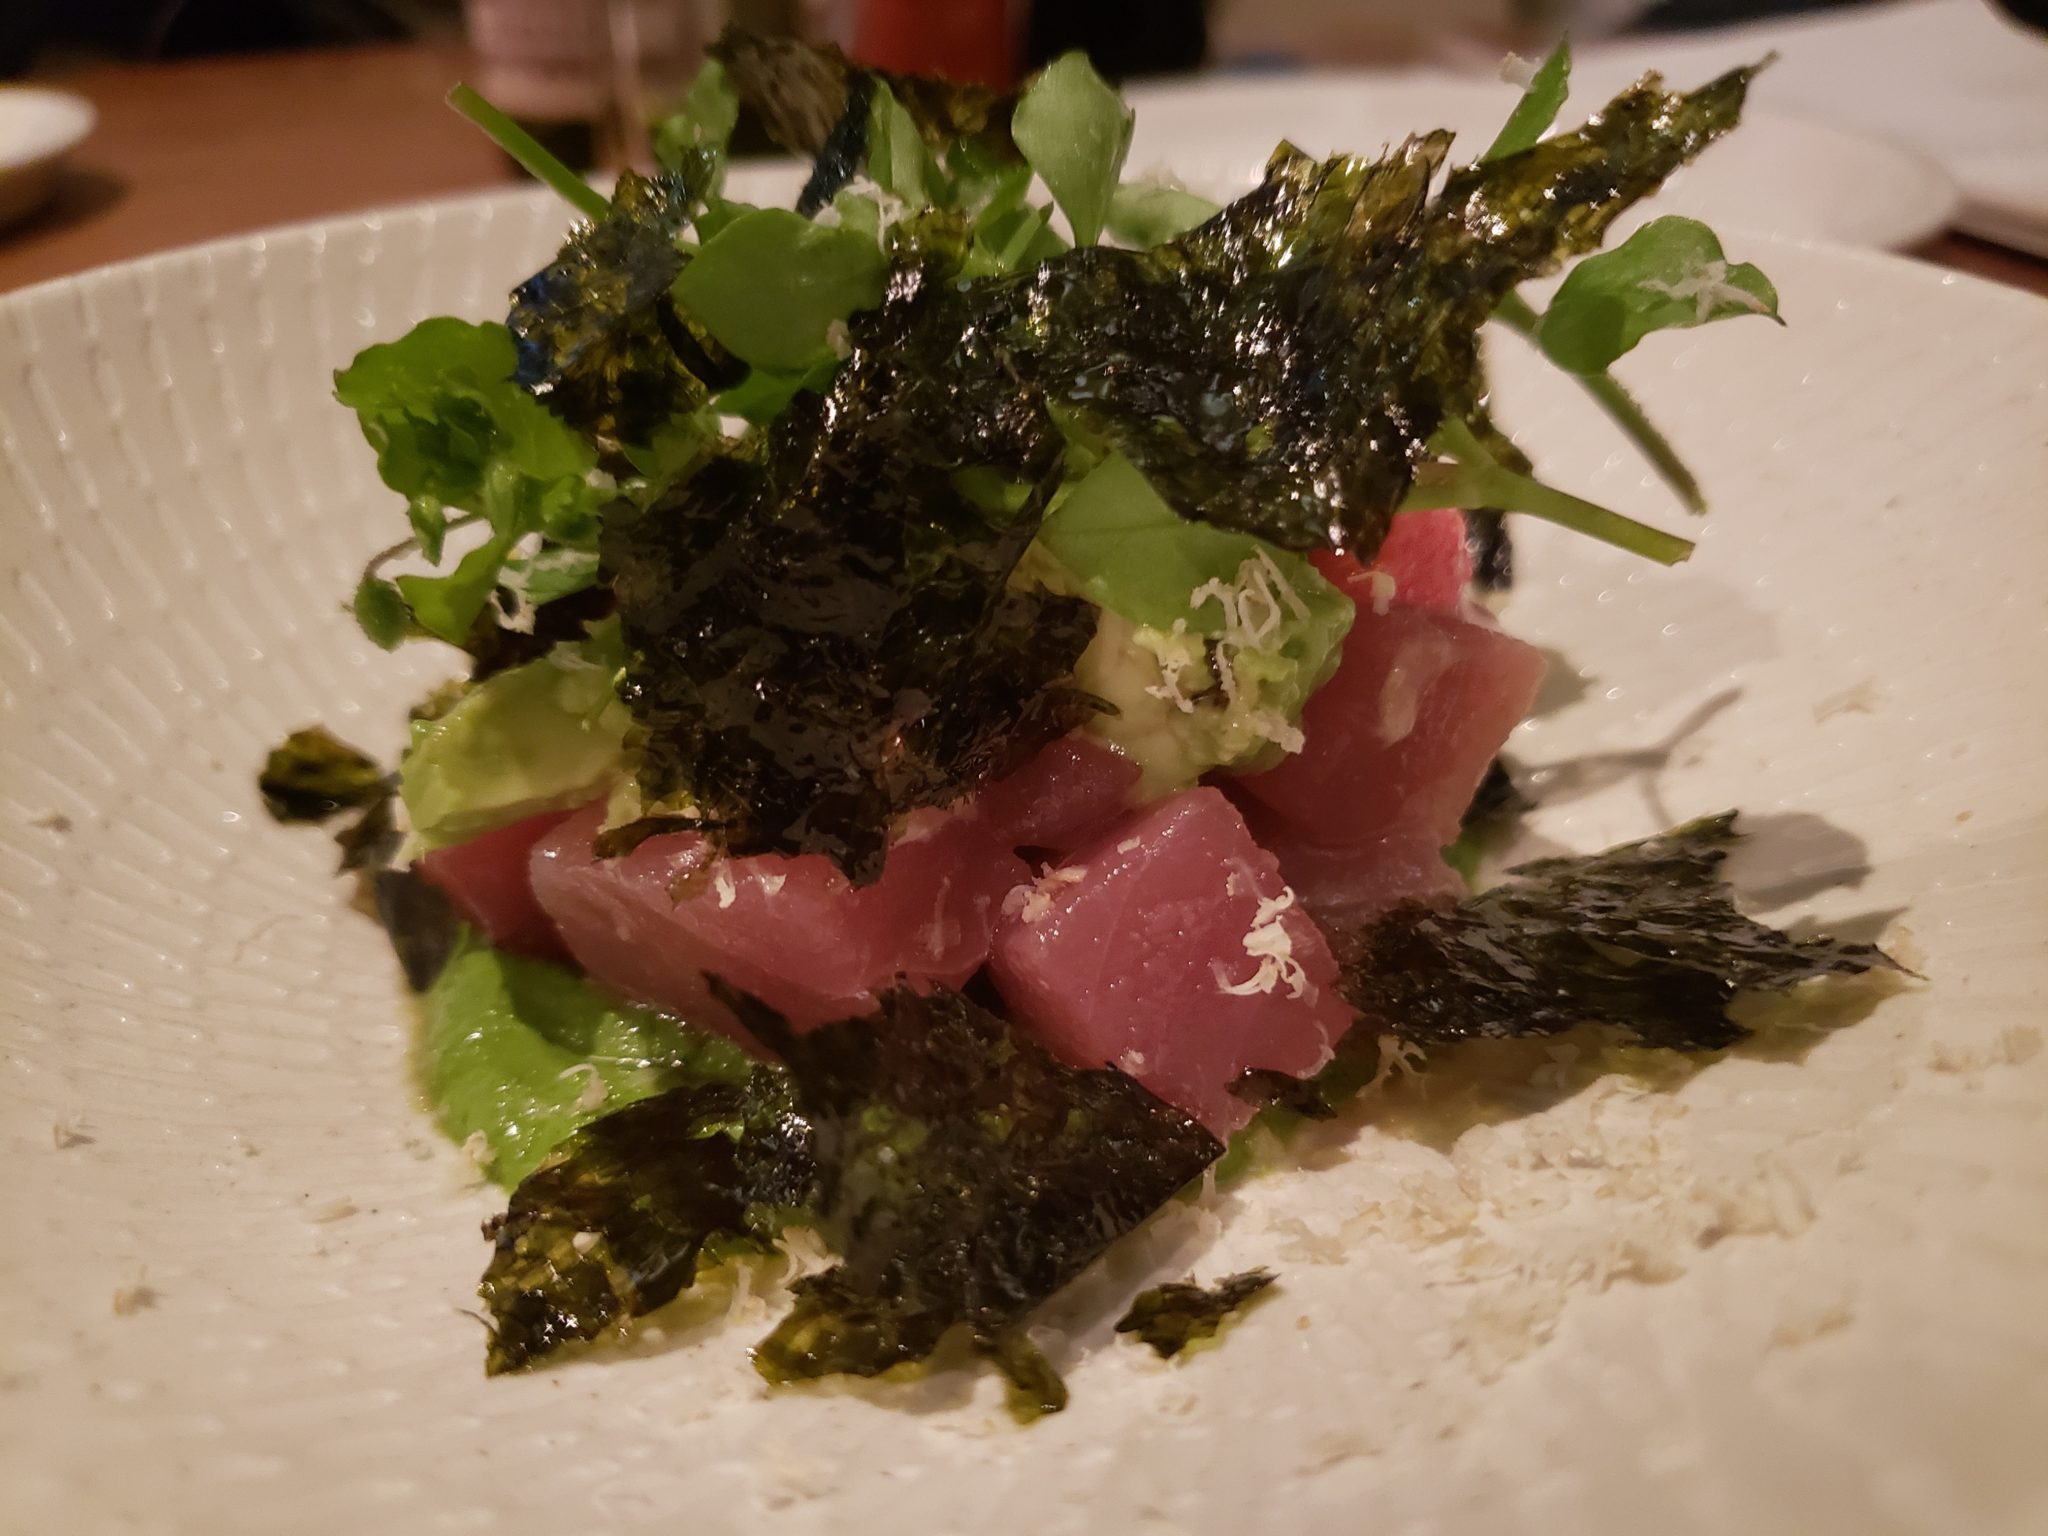 a plate of food with seaweed